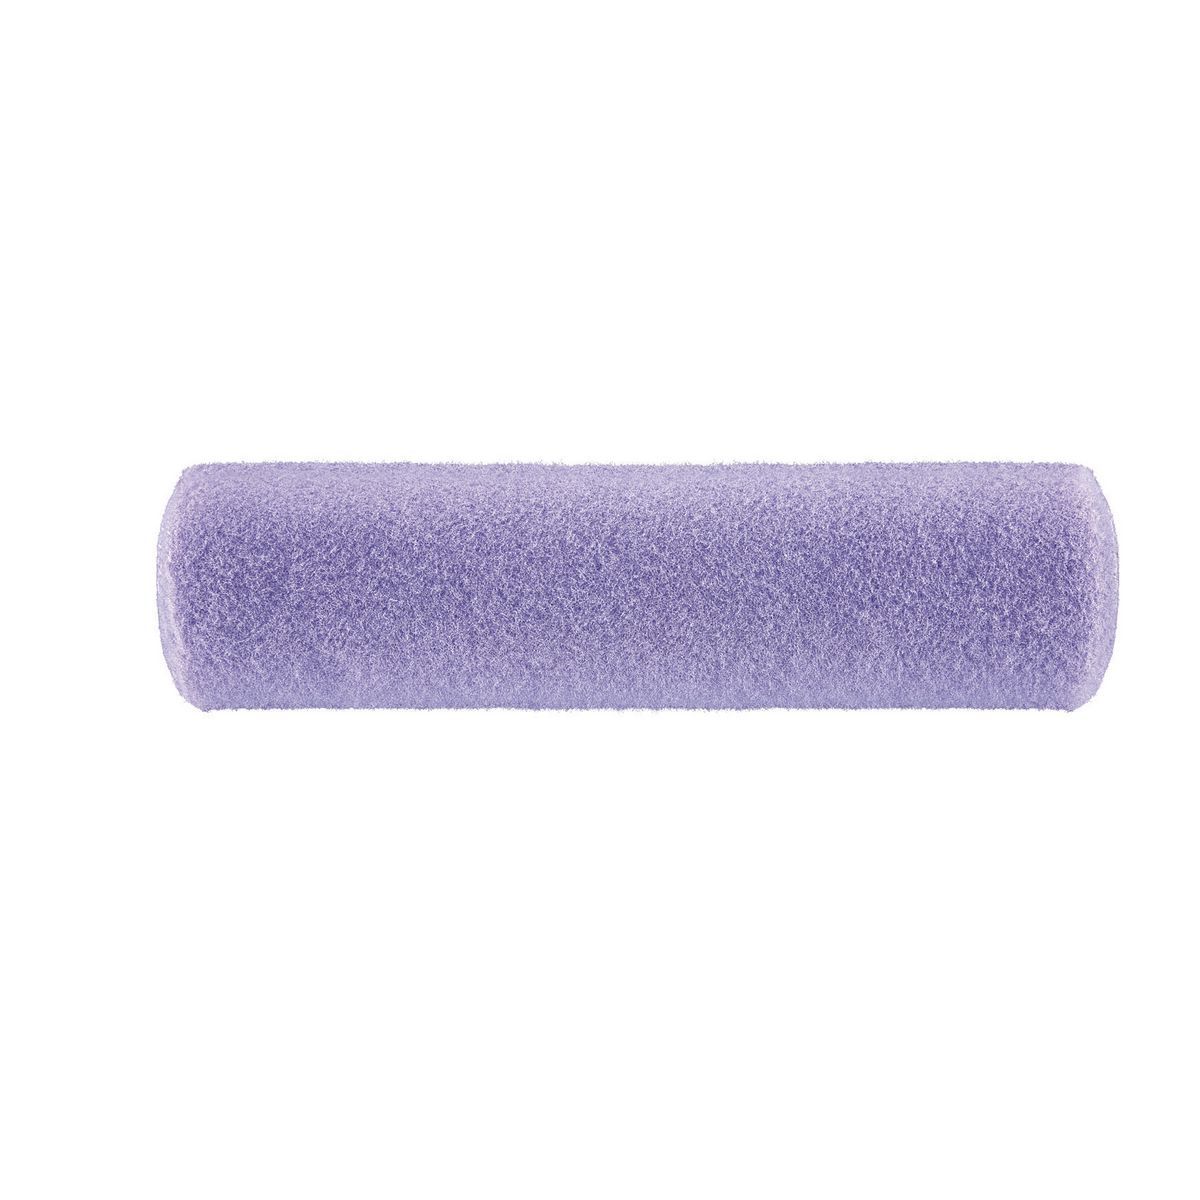 WOOSTER 9 in. Paint Roller Cover with 1/2 in. Nap - BETTER Quality